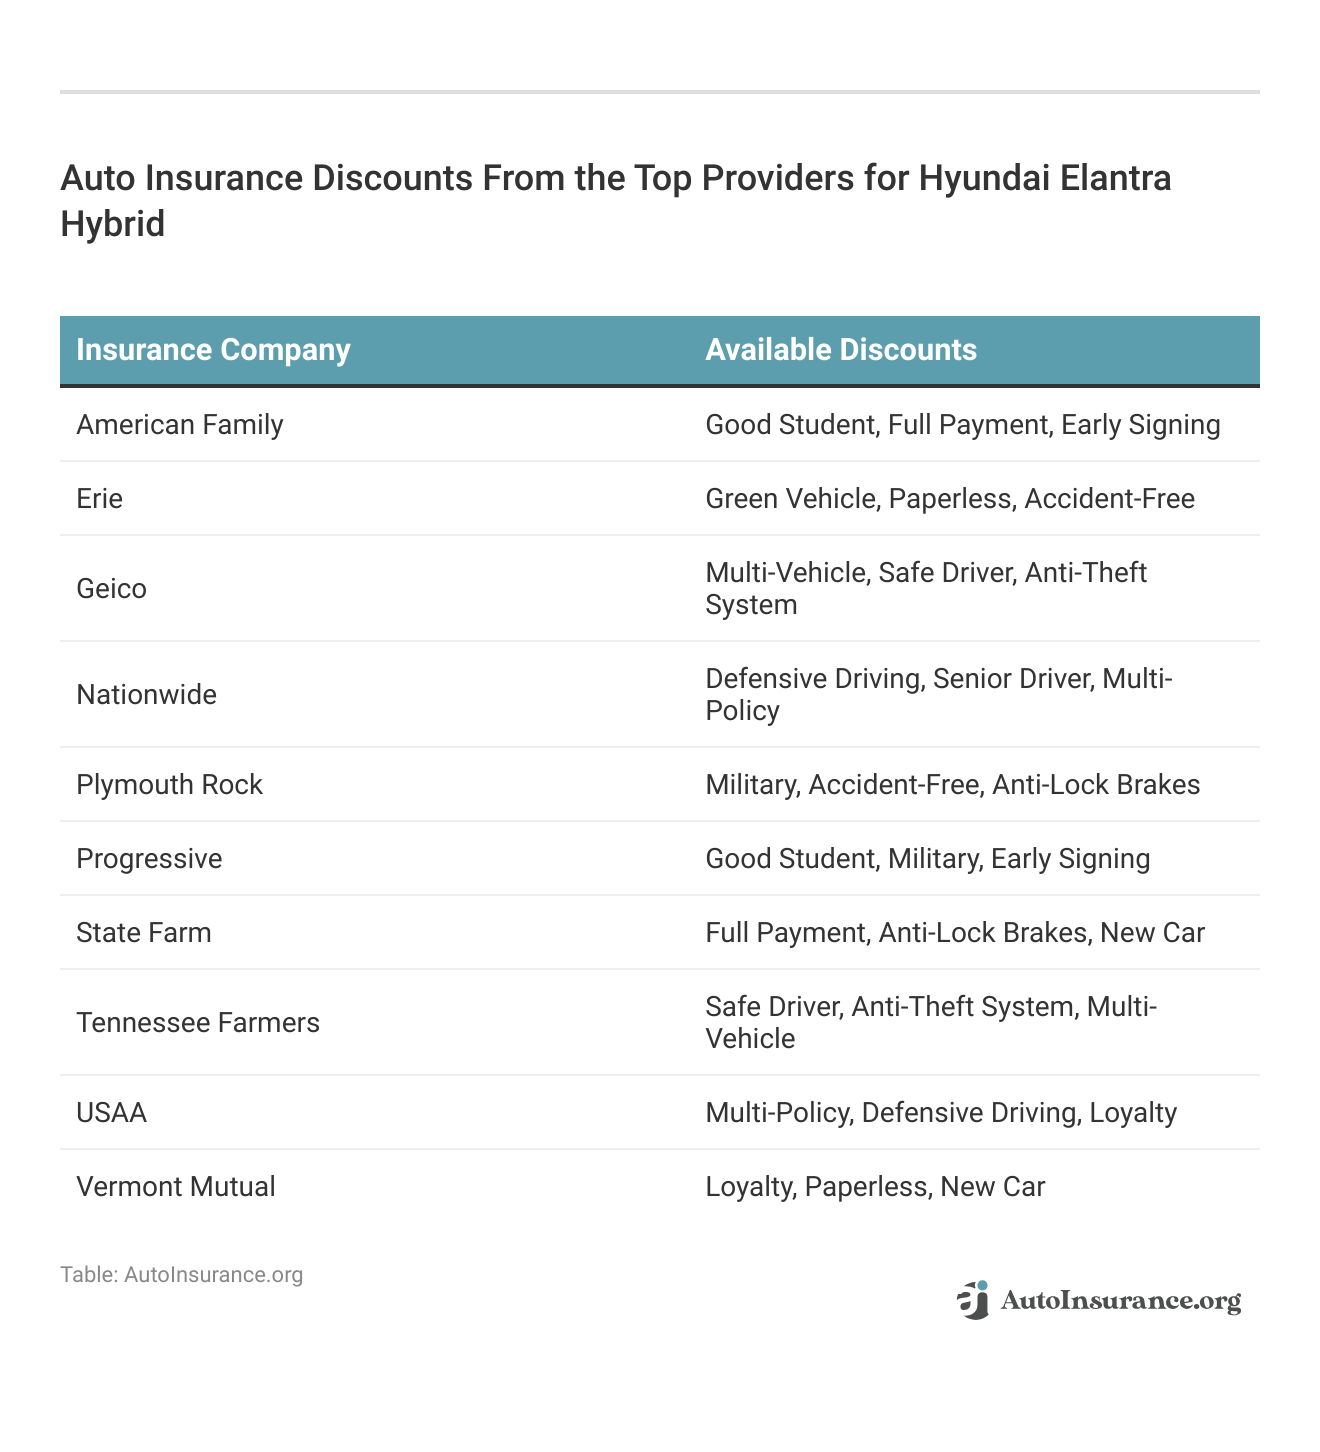 <h3>Auto Insurance Discounts From the Top Providers for Hyundai Elantra Hybrid</h3>